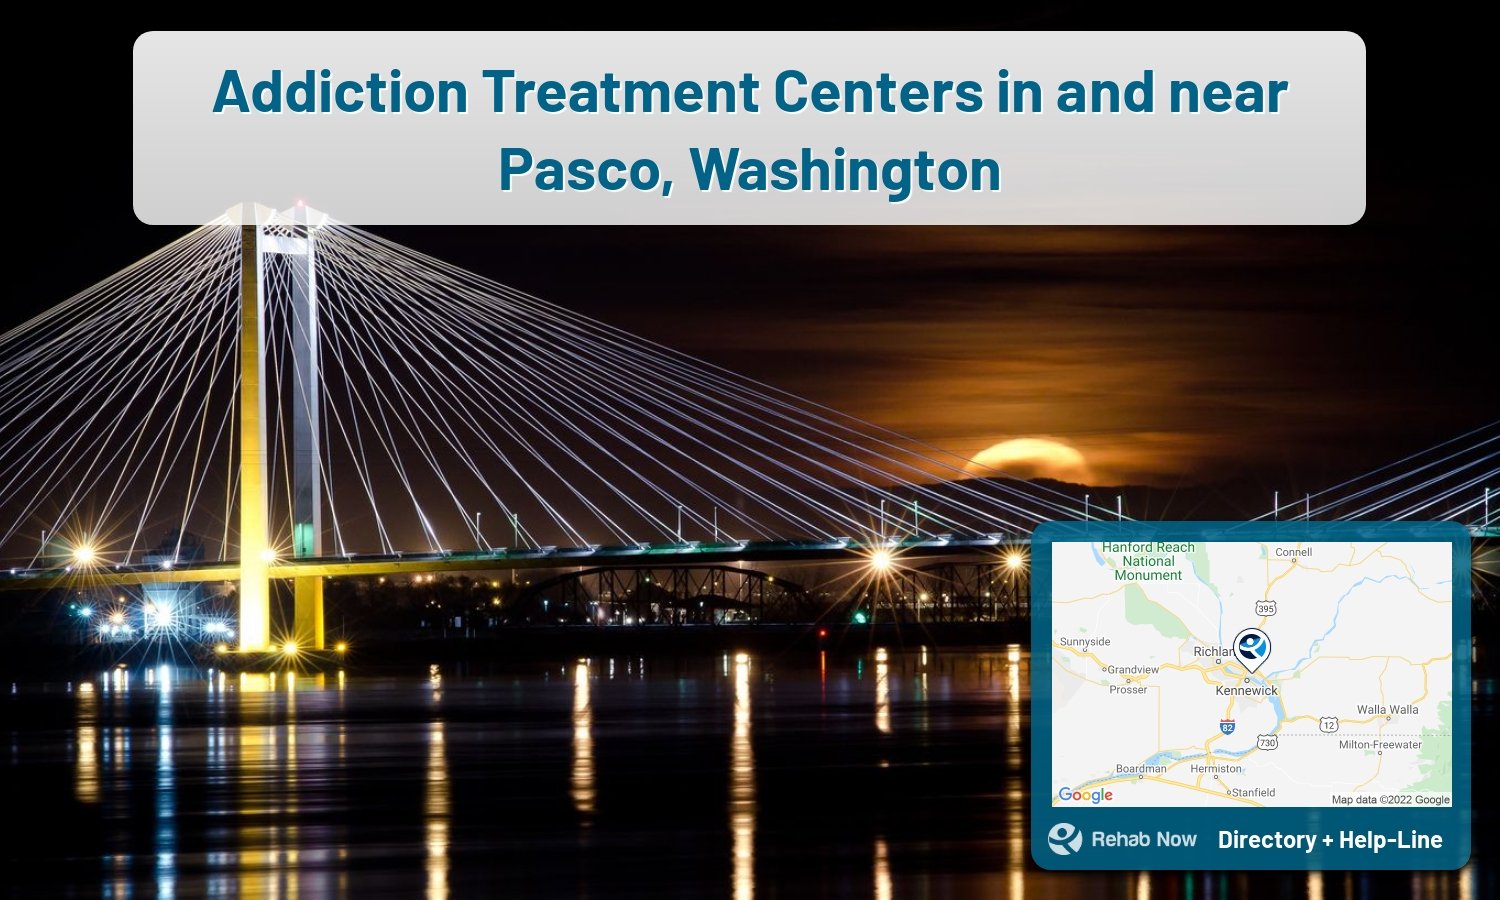 View options, availability, treatment methods, and more, for drug rehab and alcohol treatment in Pasco, Washington